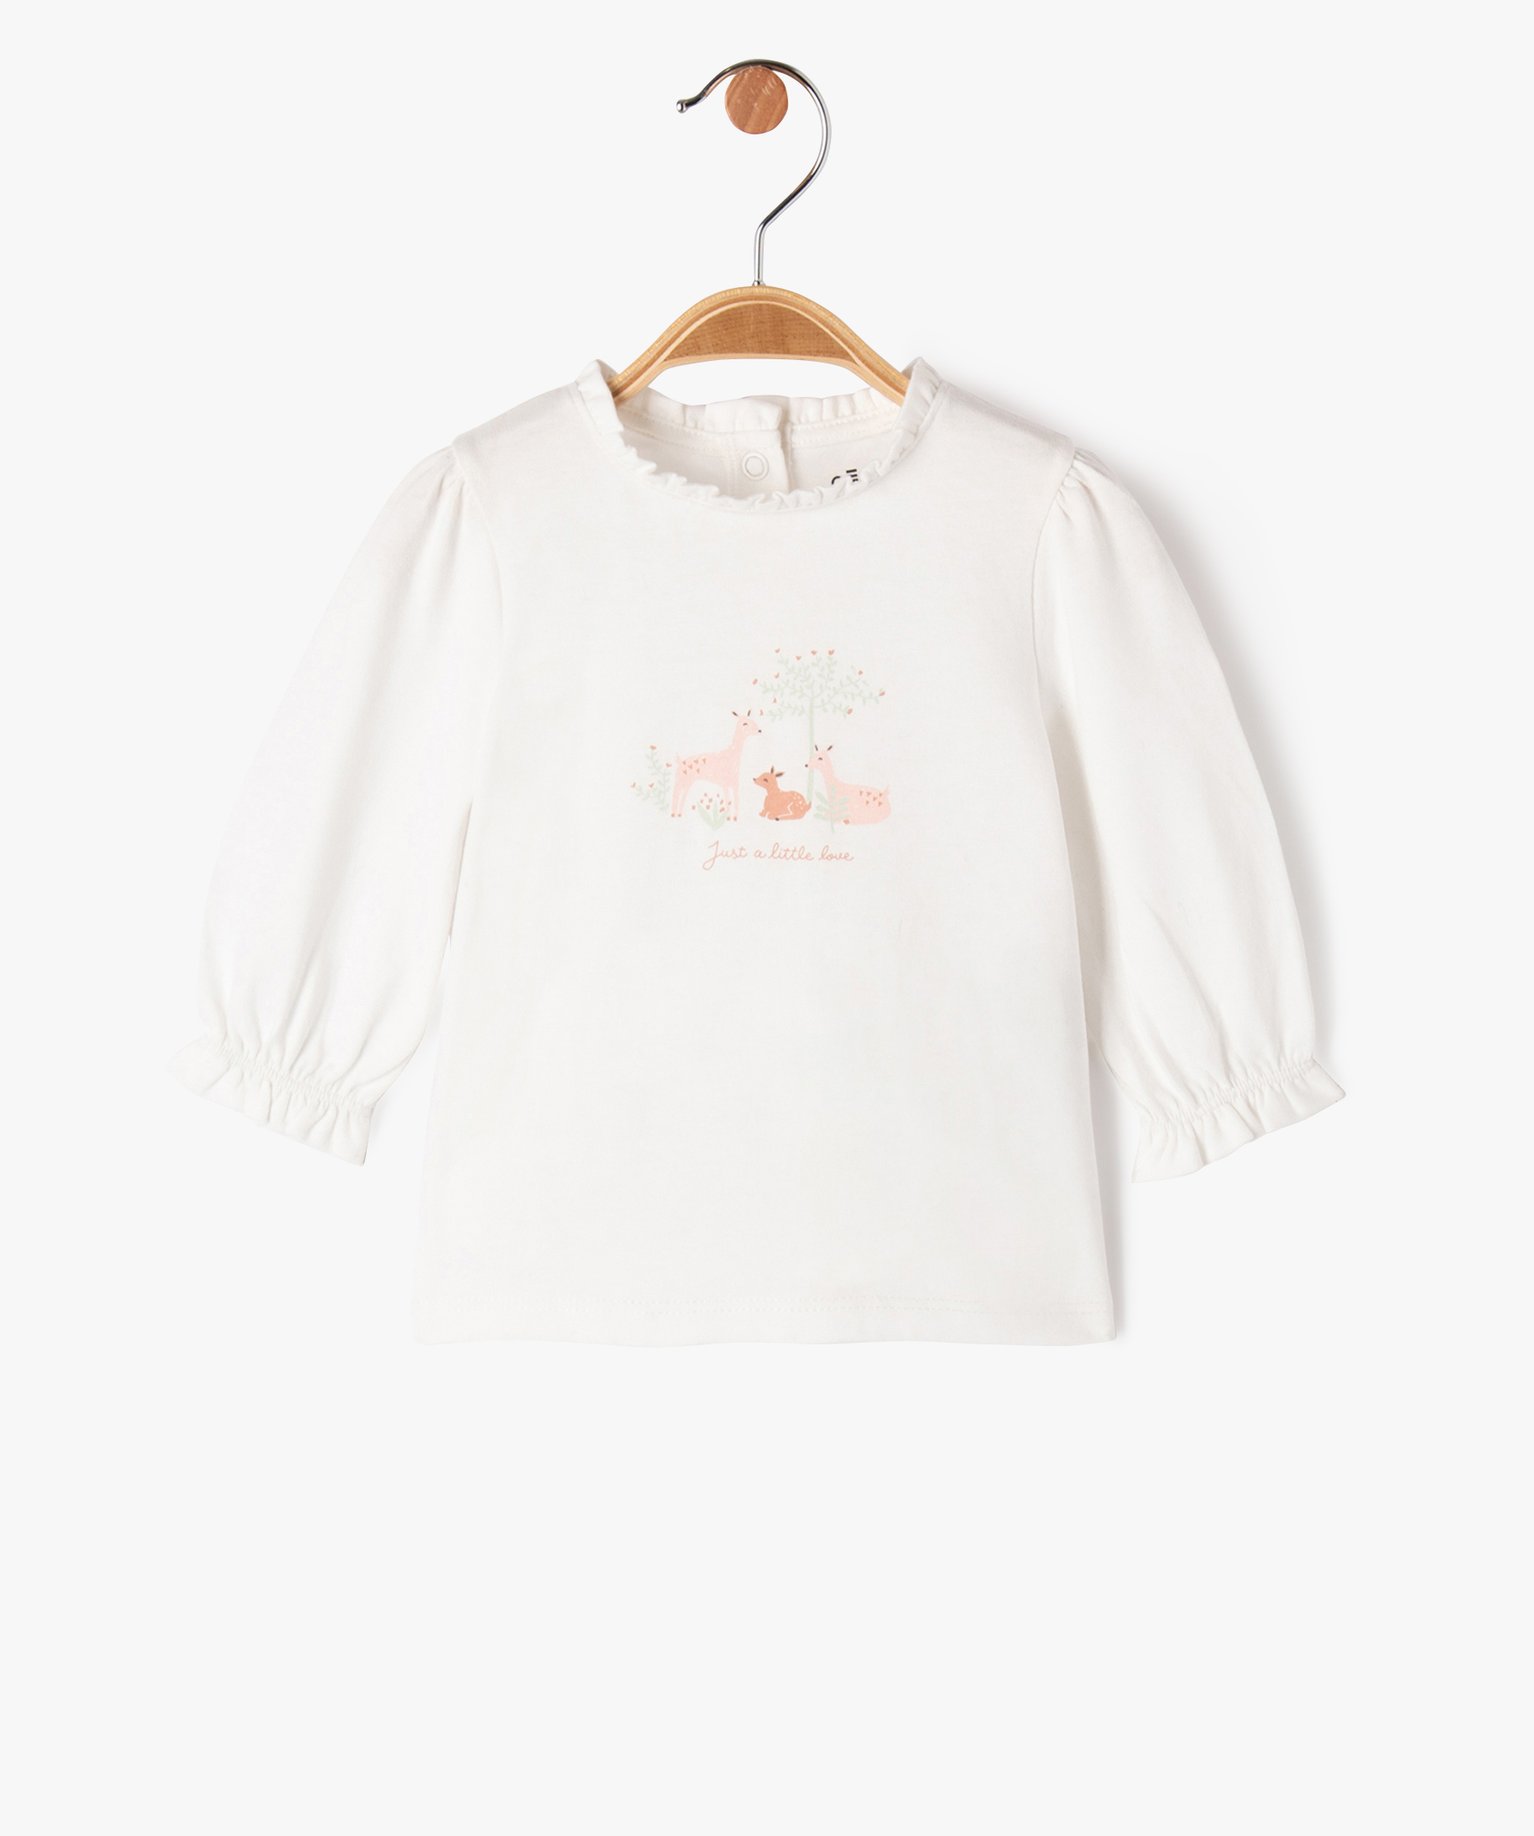 tee-shirt a manches longues finitions froncees bebe fille beige